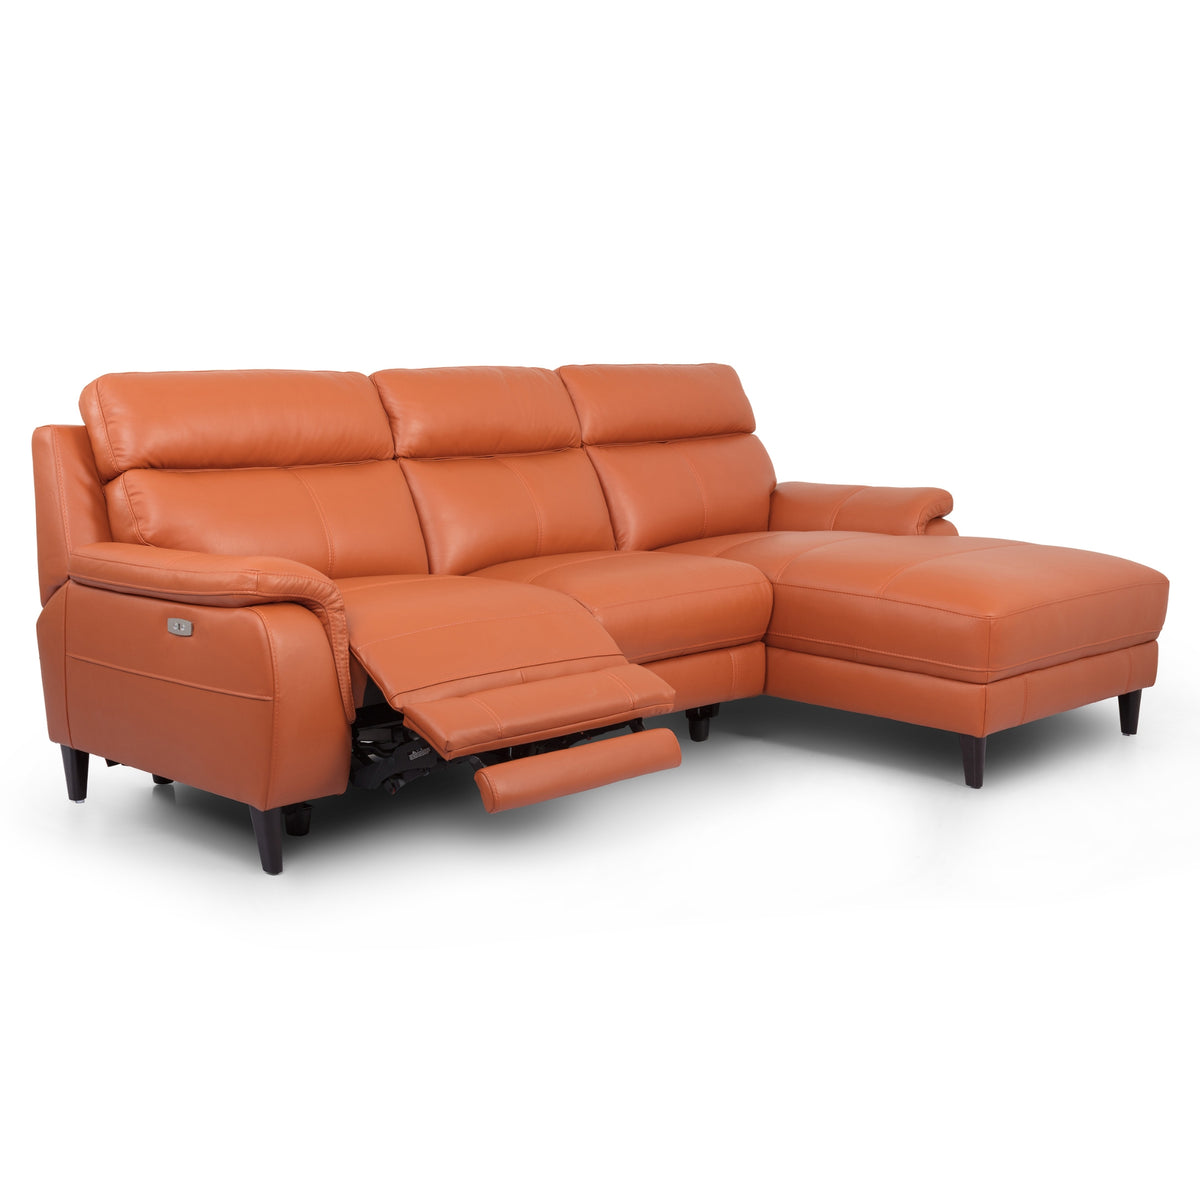 Ella 3 Seater Leather Electric Recliner Chaise Sofa Right 